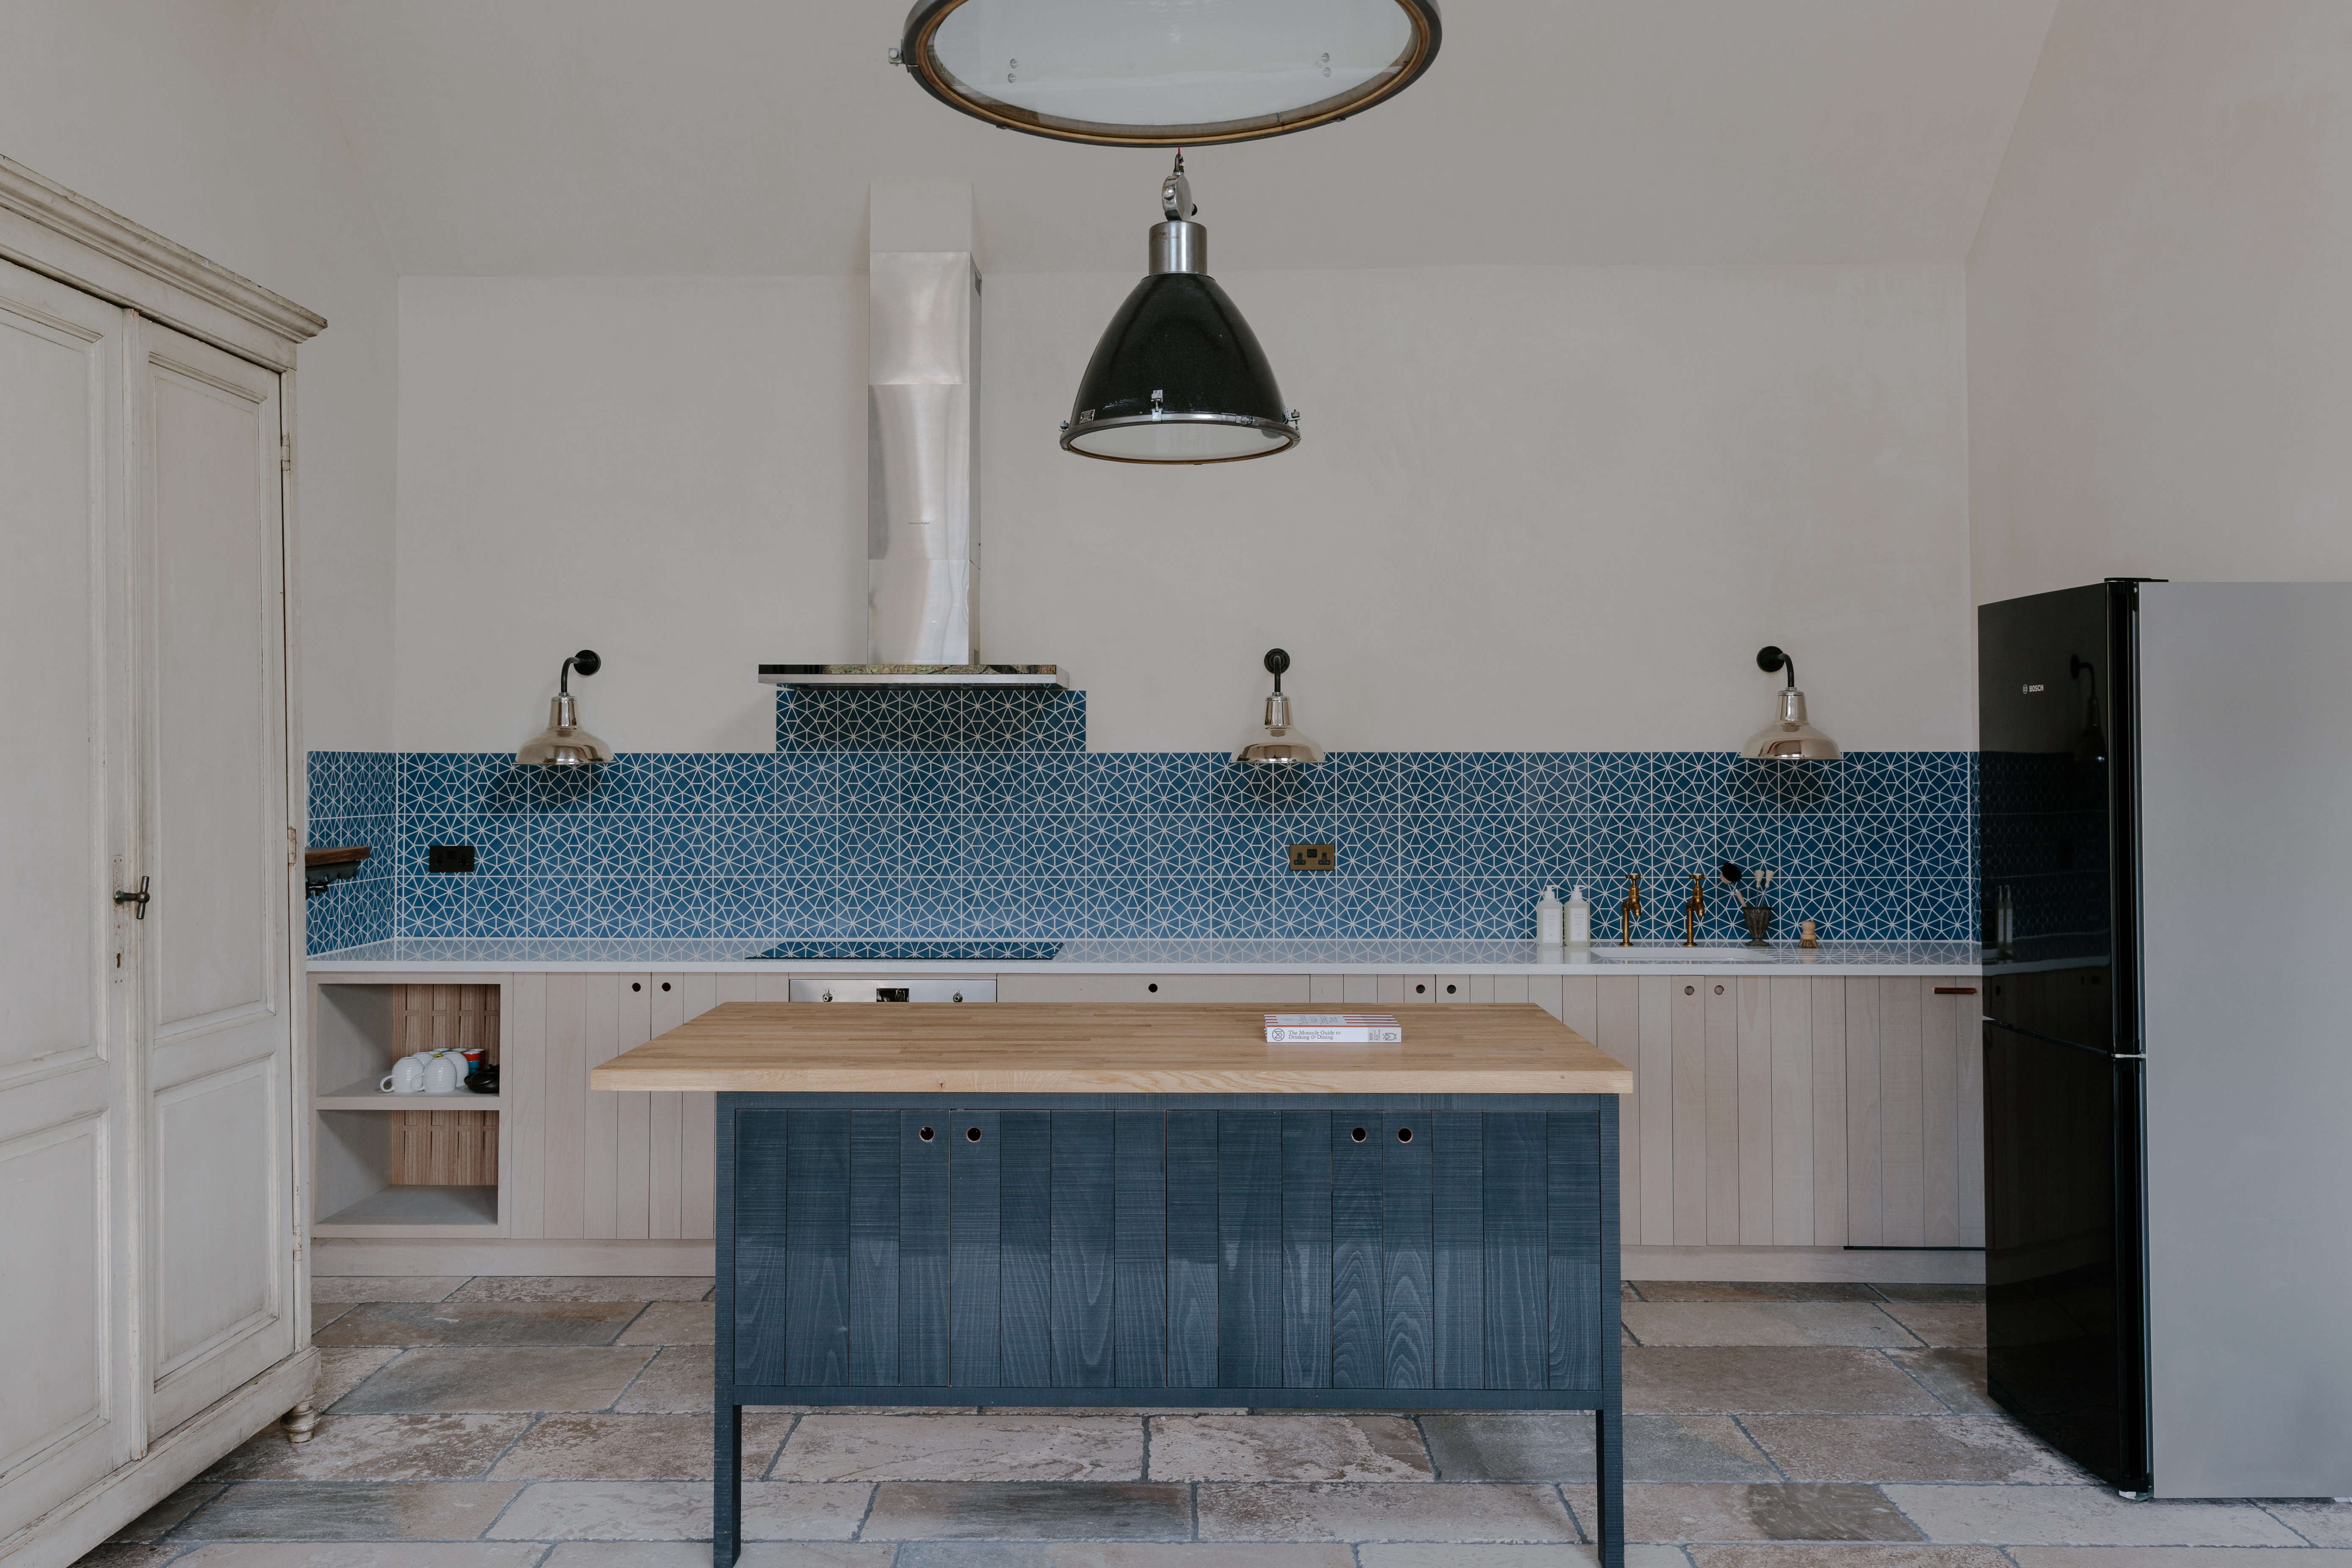 the kitchen design is the sebastian cox kitchen by devol, made with color tinte 9